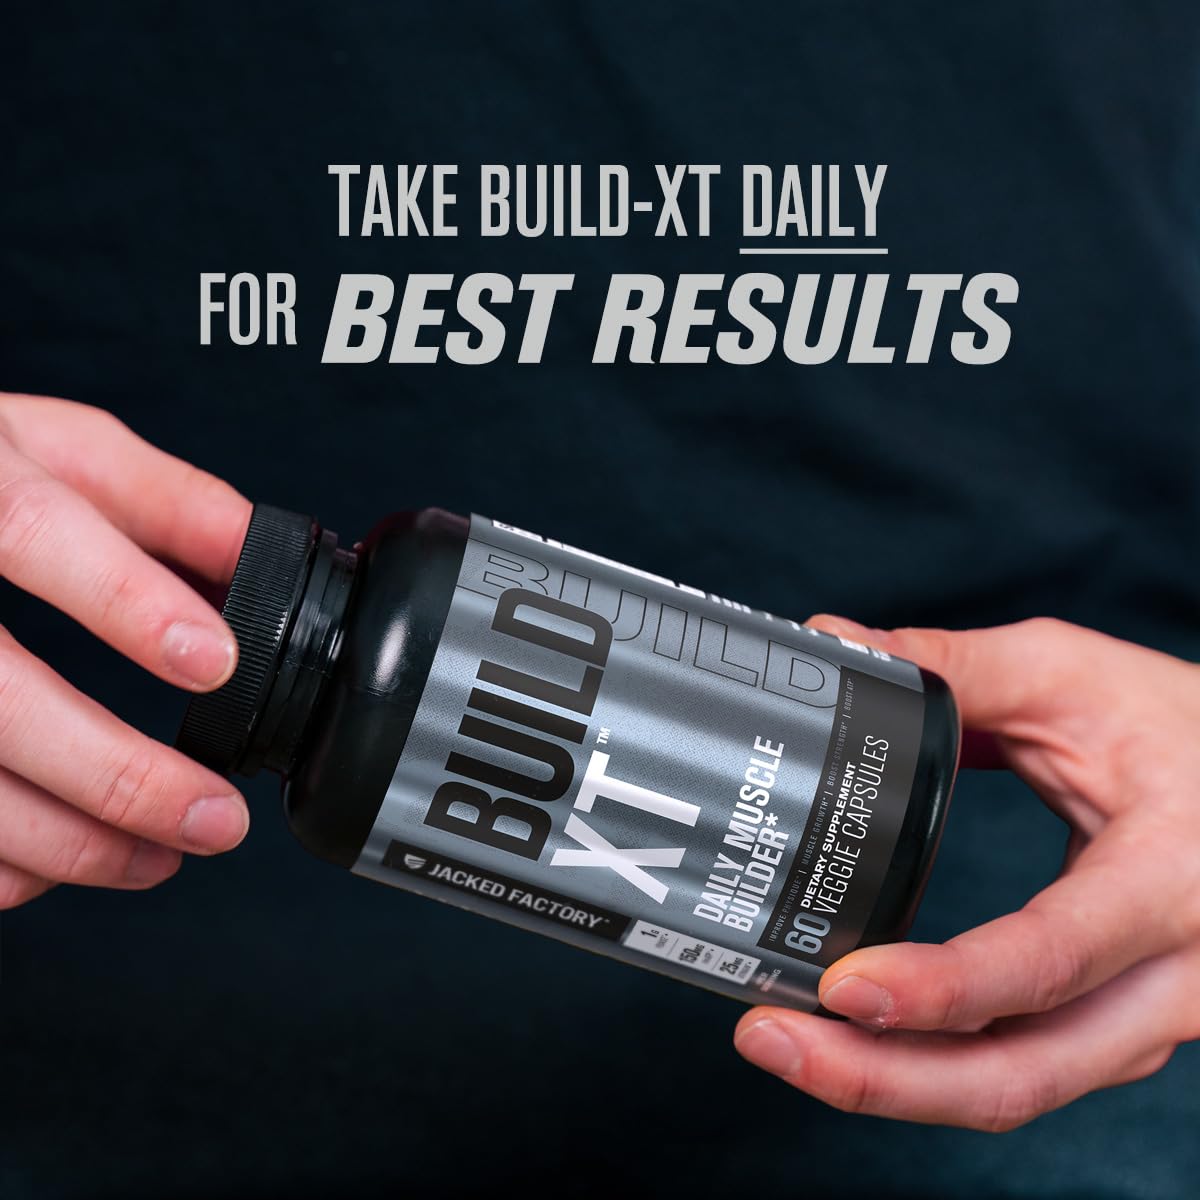 Jacked Factory Muscle Builder Supplement Stack - Build-XT Muscle Builder & N.O. XT Nitric Oxide Boosting Agent for Dual Muscle Building Support (60 Day Supply)